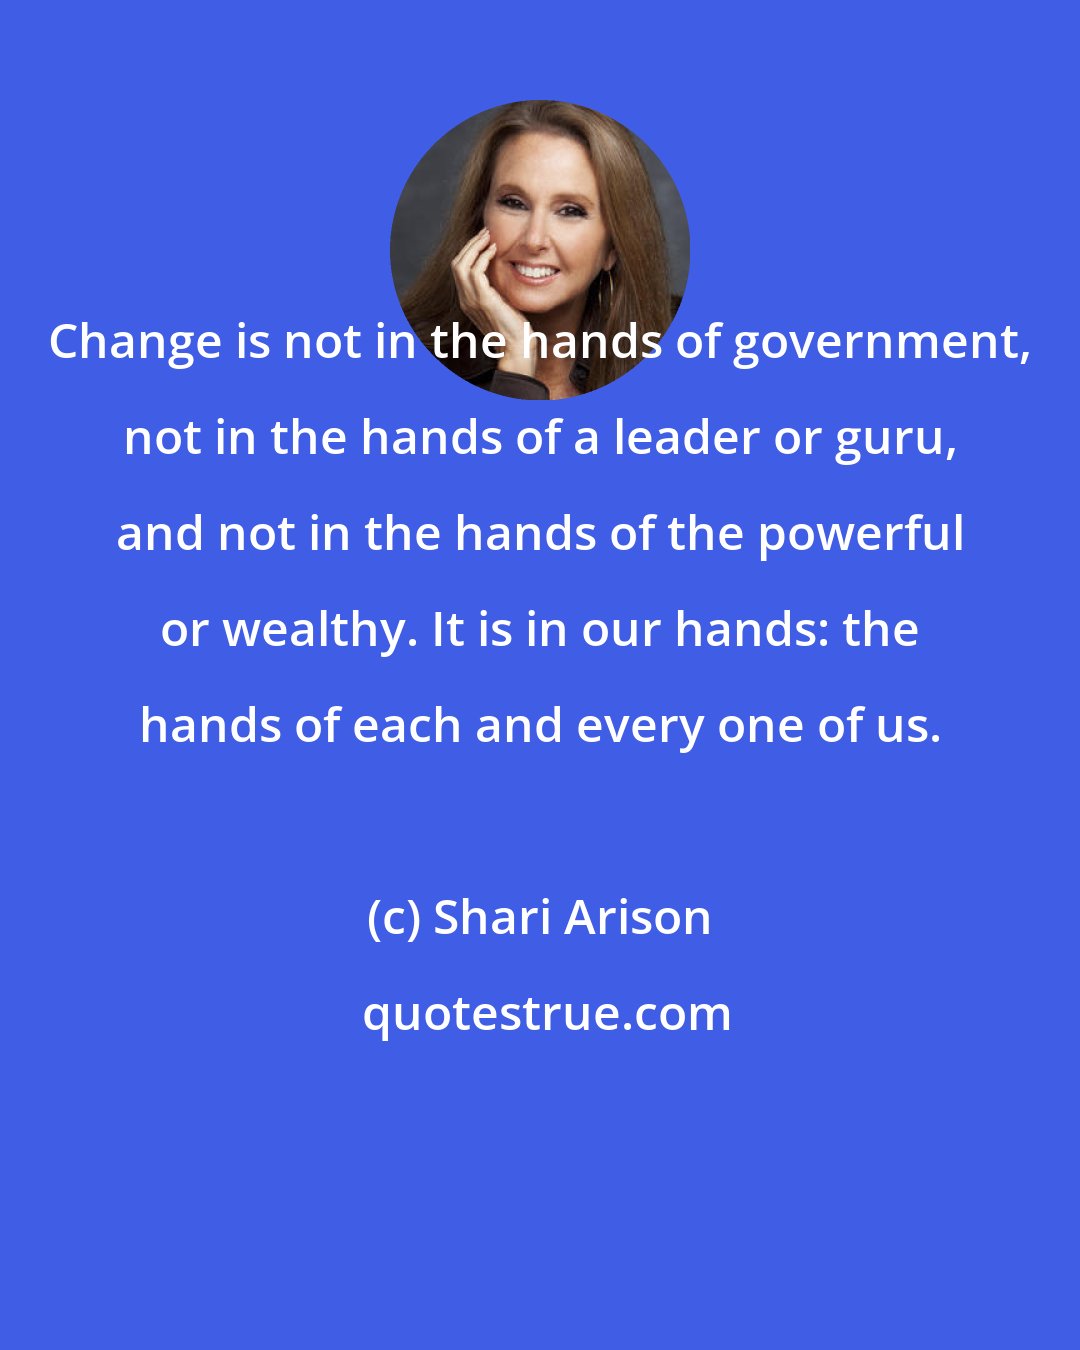 Shari Arison: Change is not in the hands of government, not in the hands of a leader or guru, and not in the hands of the powerful or wealthy. It is in our hands: the hands of each and every one of us.